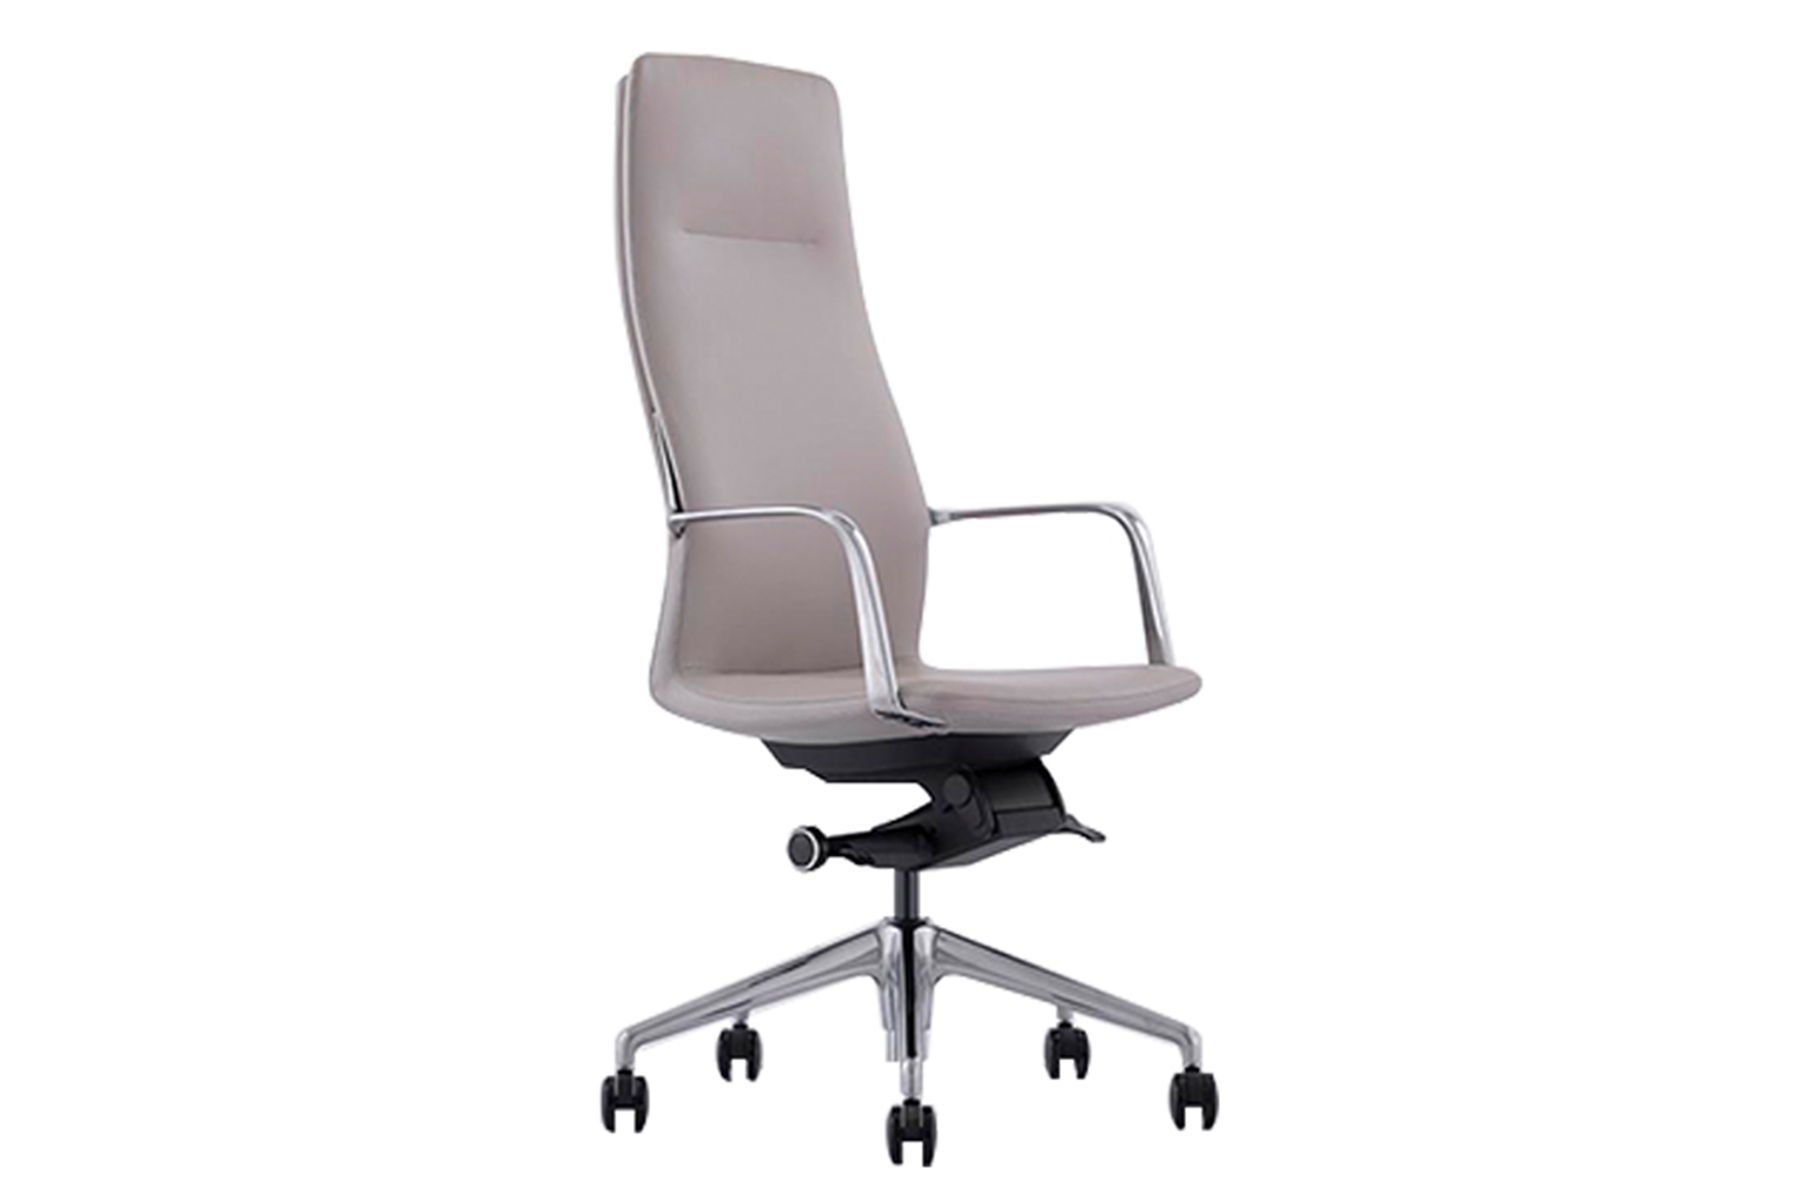 New multi-functional contemporary fashion style high back office leather chair